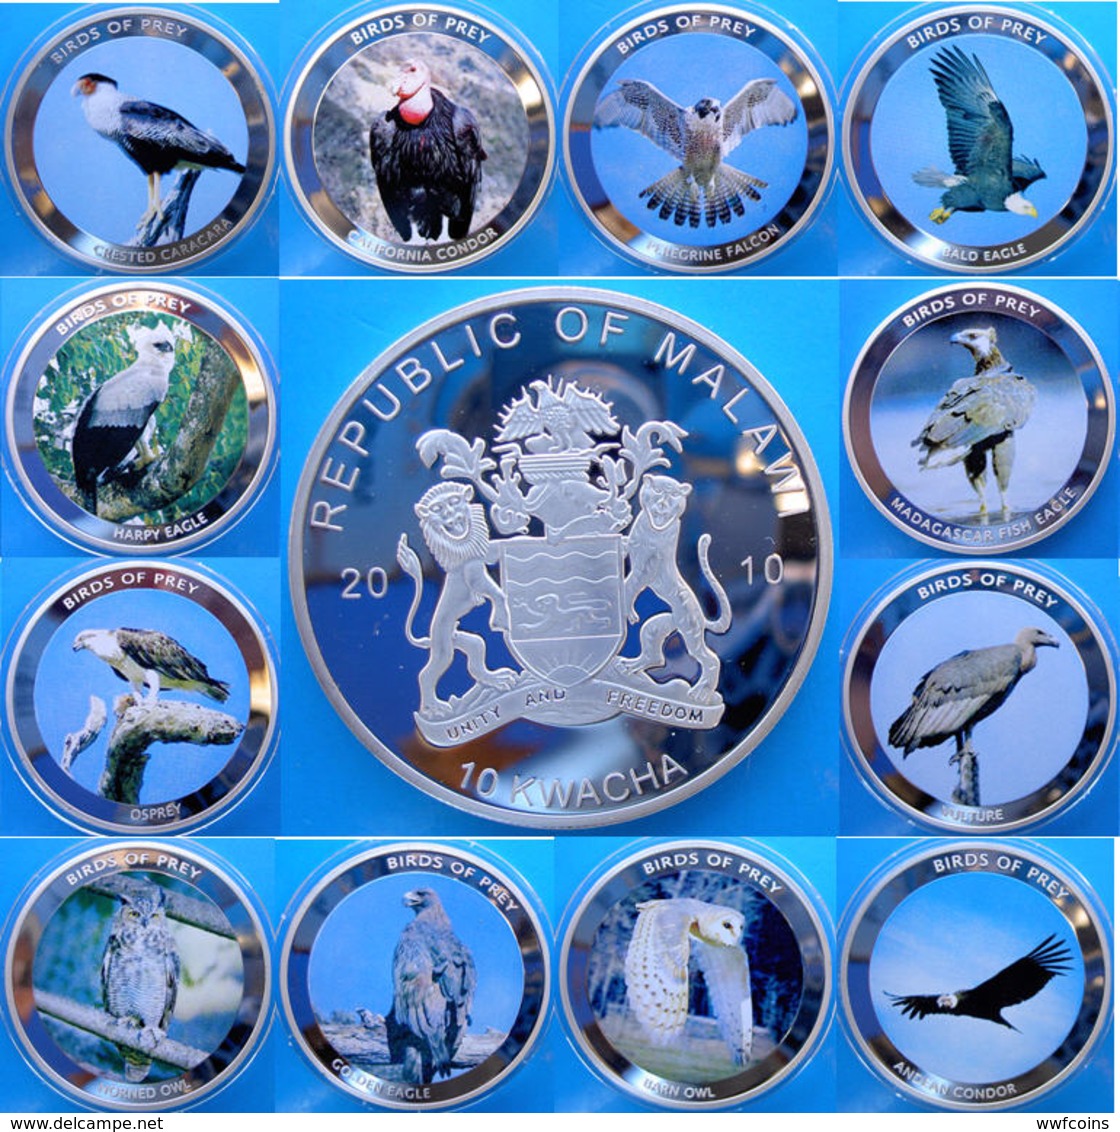 MALAWI AFRICA 12 COINS X 10 KWACHA 2010 PROOF SILVER PLATED GIANT COINS BIRDS OF PREY WEIGHT 49,6gX12 UNC. - Malawi